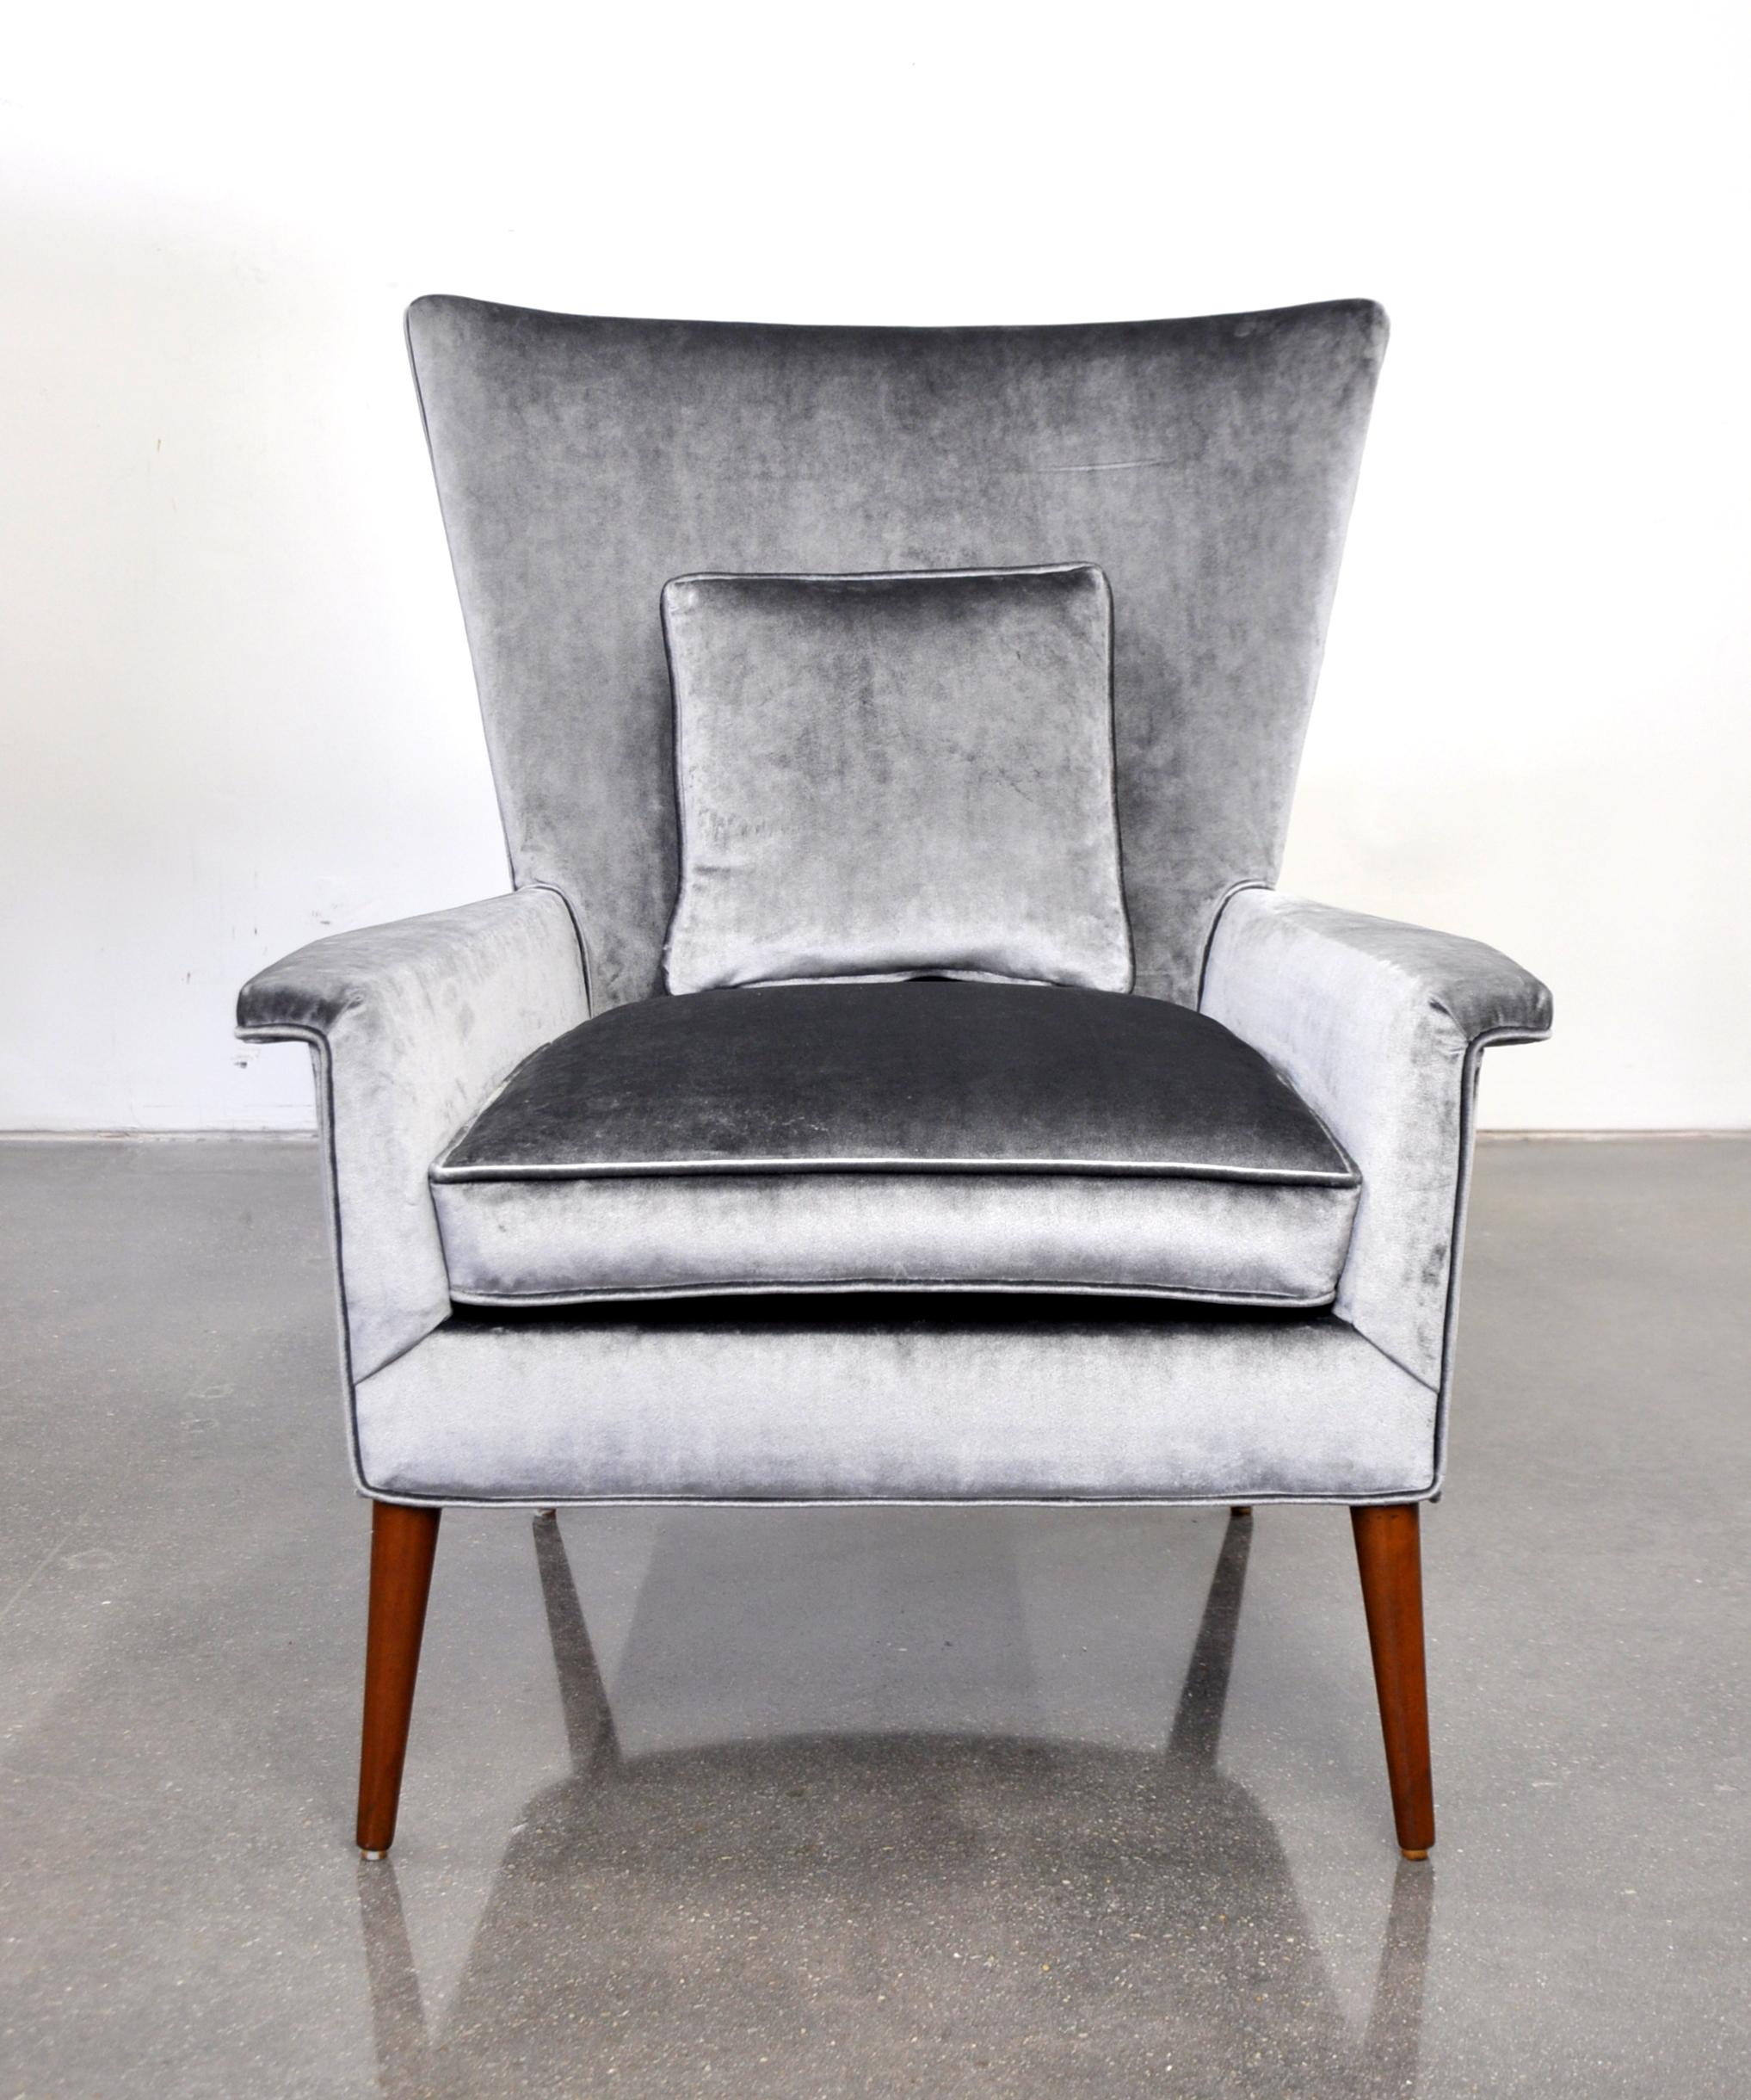 Rare Mid-Century Modern high back armchair designed by Paul McCobb for the Planner Group line and first manufactured by Custom Craft in 1950. Reupholstered in silver light gunmetal grey cotton velvet, the chair features a winged-back highback design